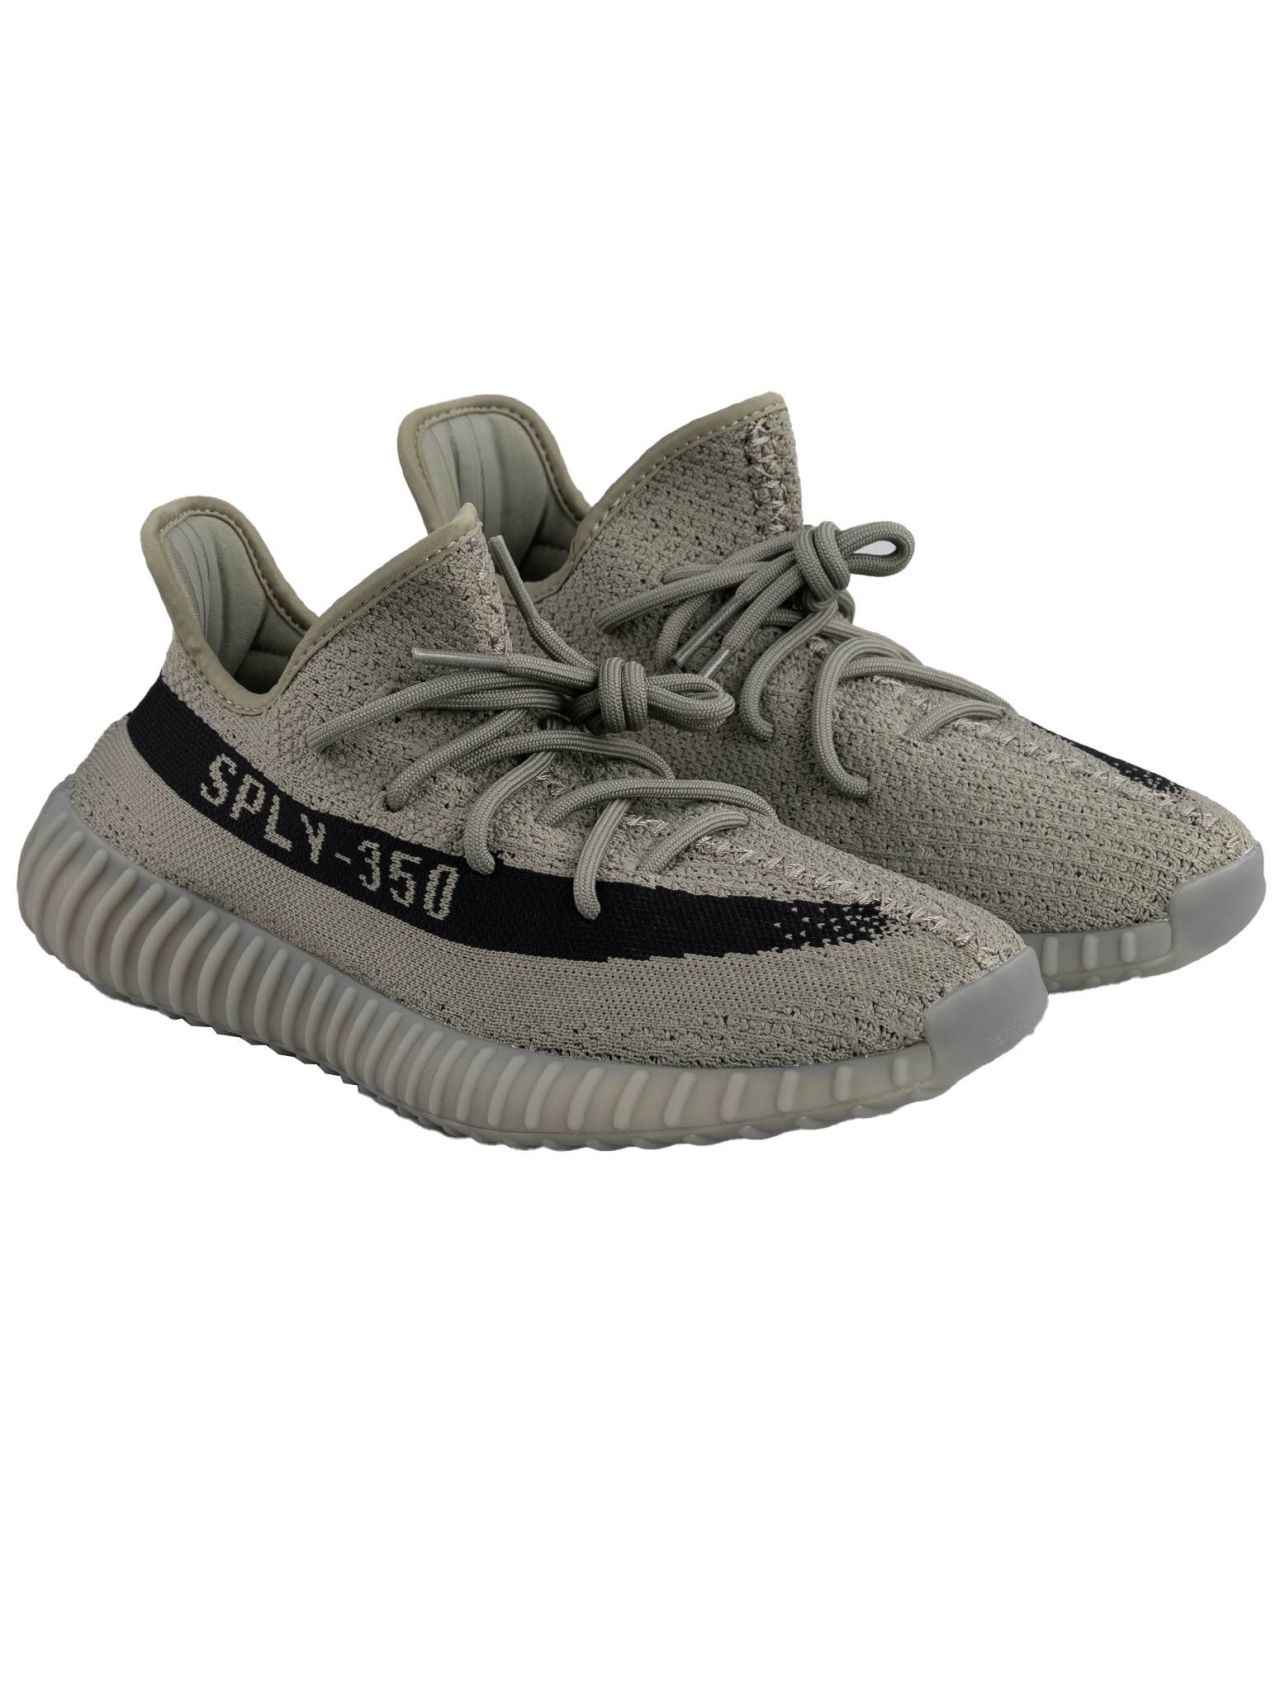 Adidas Yeezy Boost SPLY-350 V2 Green Black Pl Sneakers | IsuiT